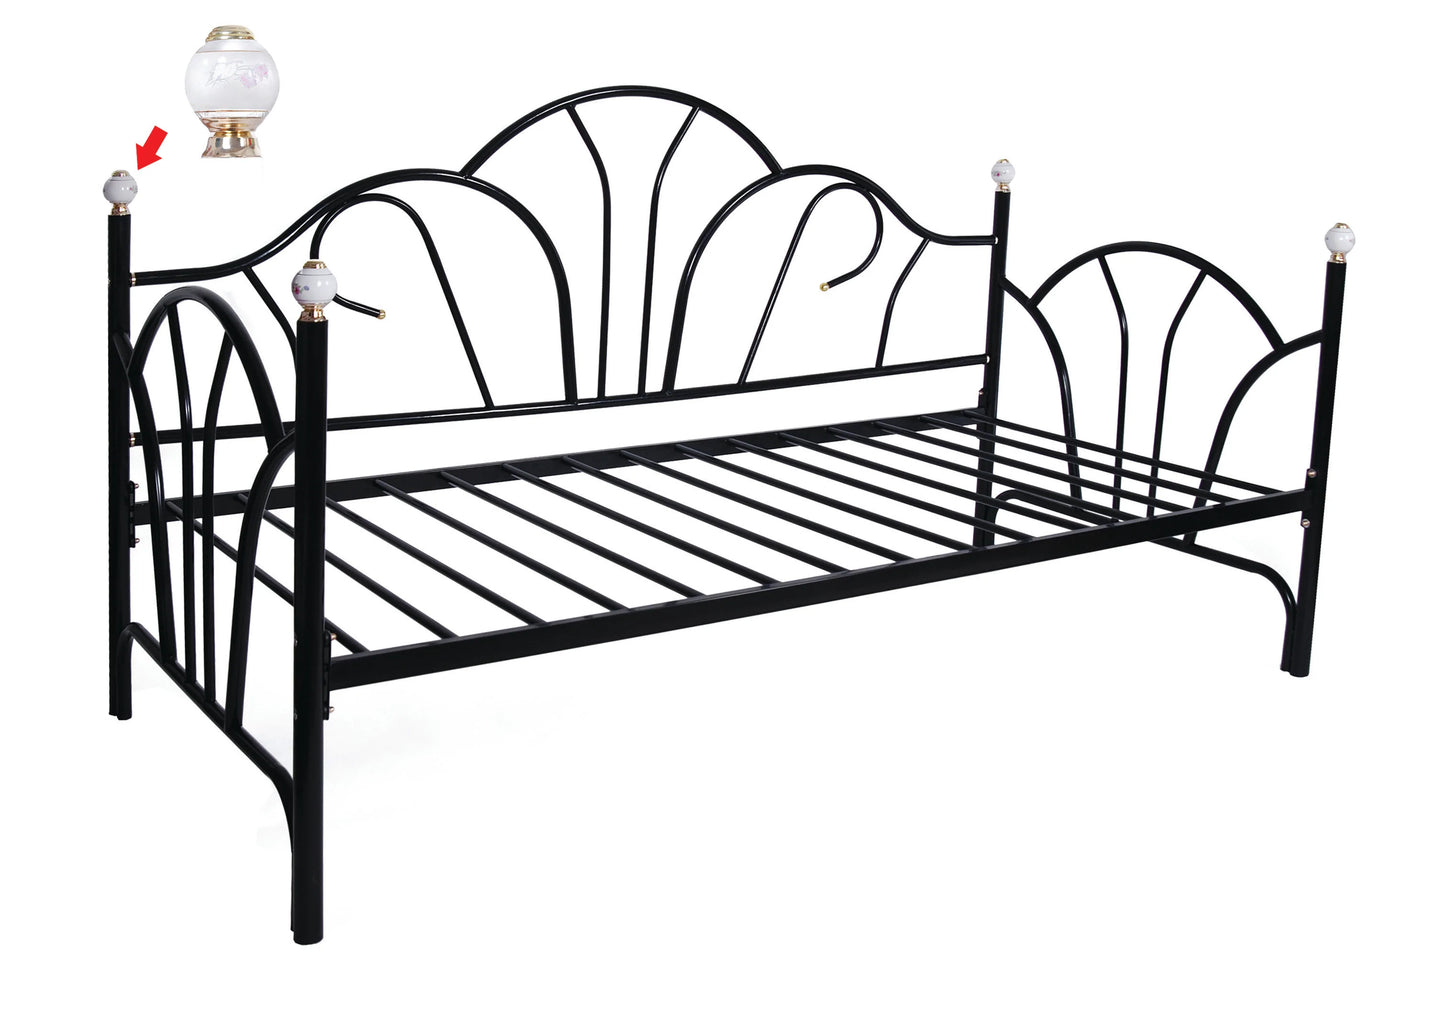 Metal Day Bed with Bed Frame Comes in Black or White